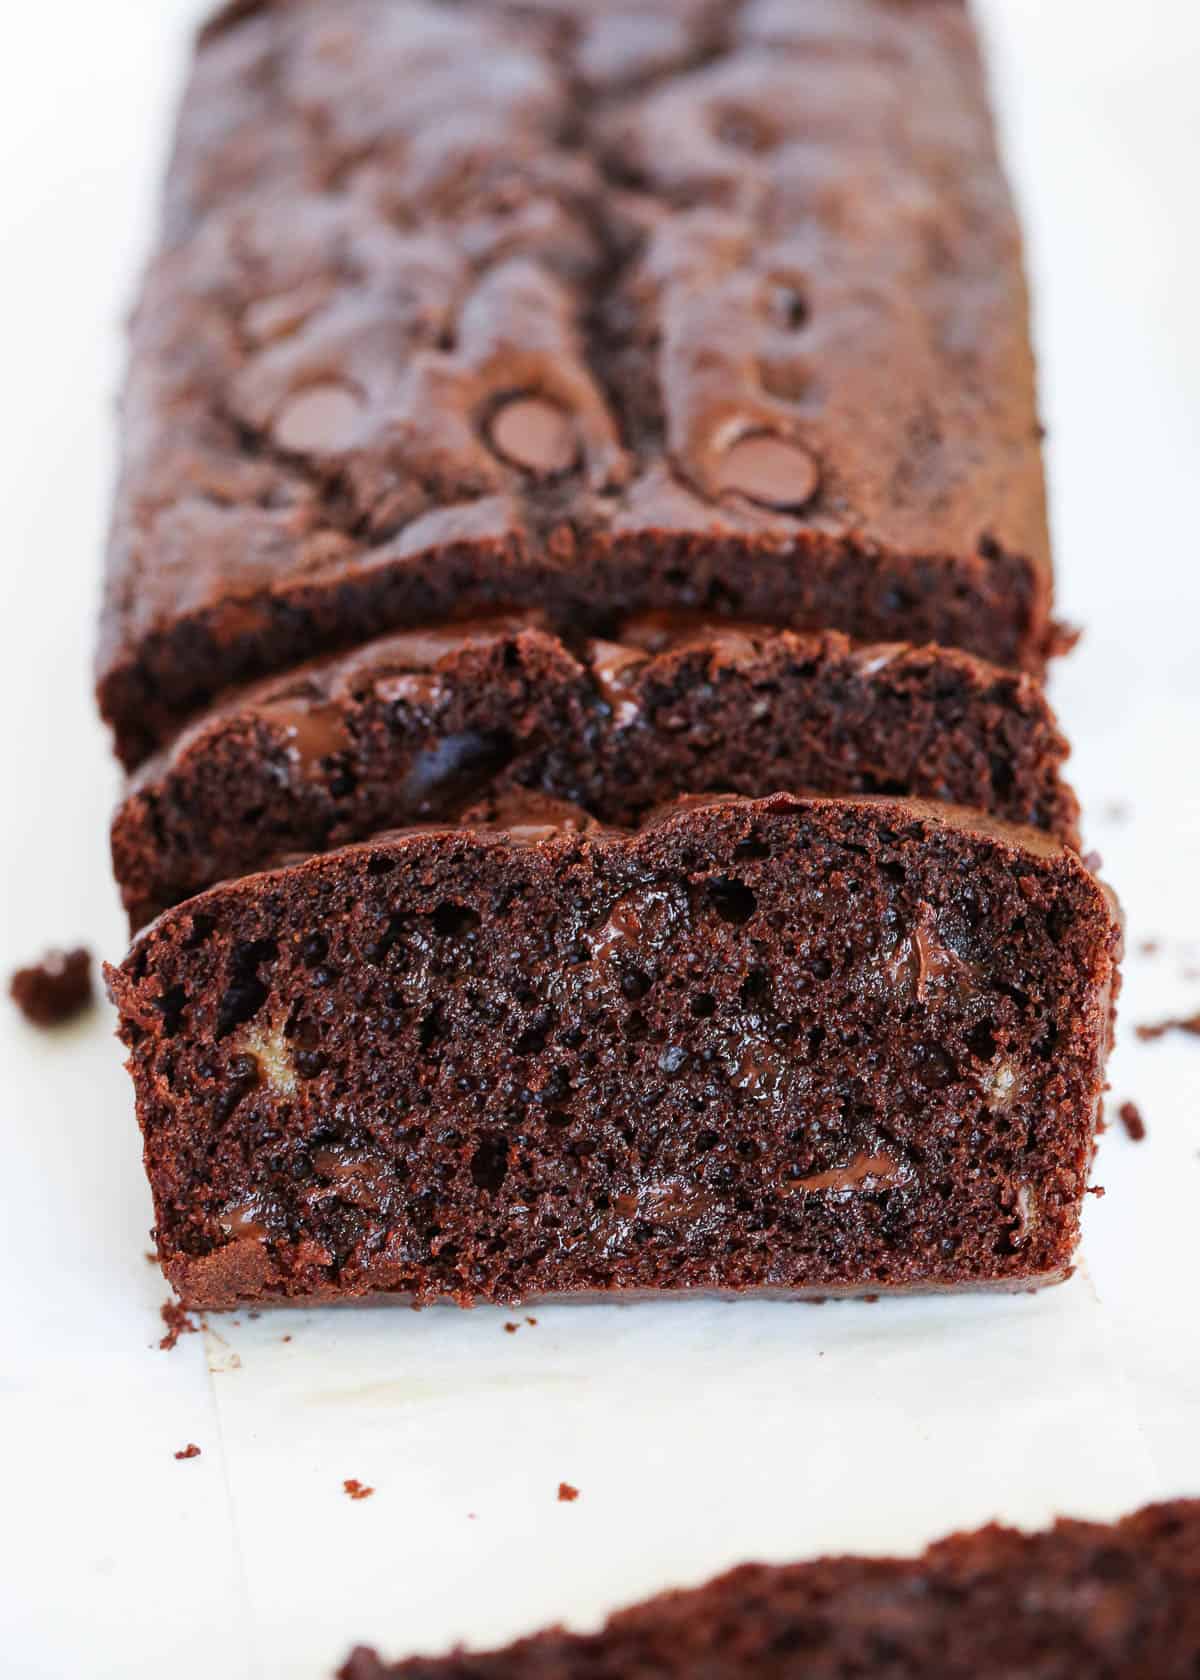 Sliced chocolate banana bread on parchment paper.